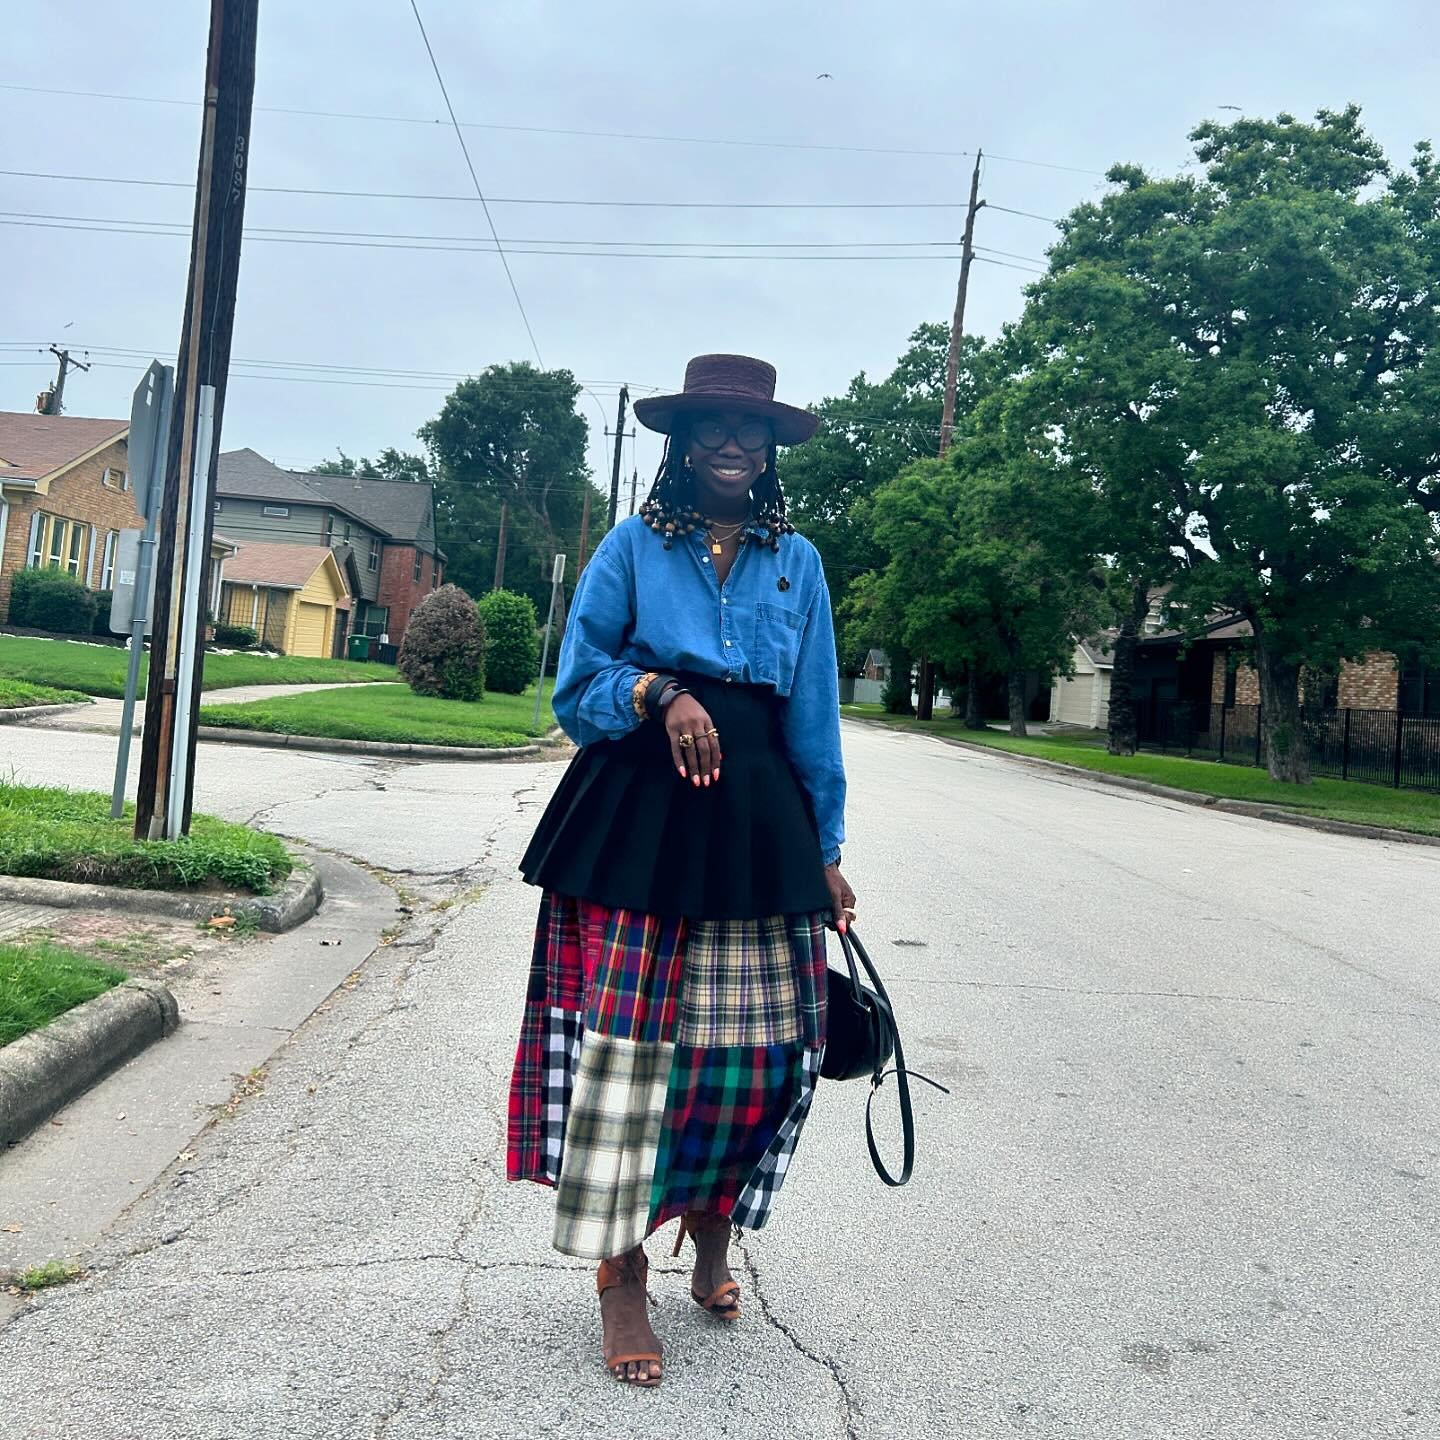 The older I get, the more I find joy in wearing whatever I want&hellip;

Hat: thrifted
Shirt: @gap (vintage)
Top skirt: @target @targetstyle 
Skirt: vintage
Shoes: @schutz (so old, that they are falling apart 😂)
Bag: @aniajeniseco 

#livelovely #chu